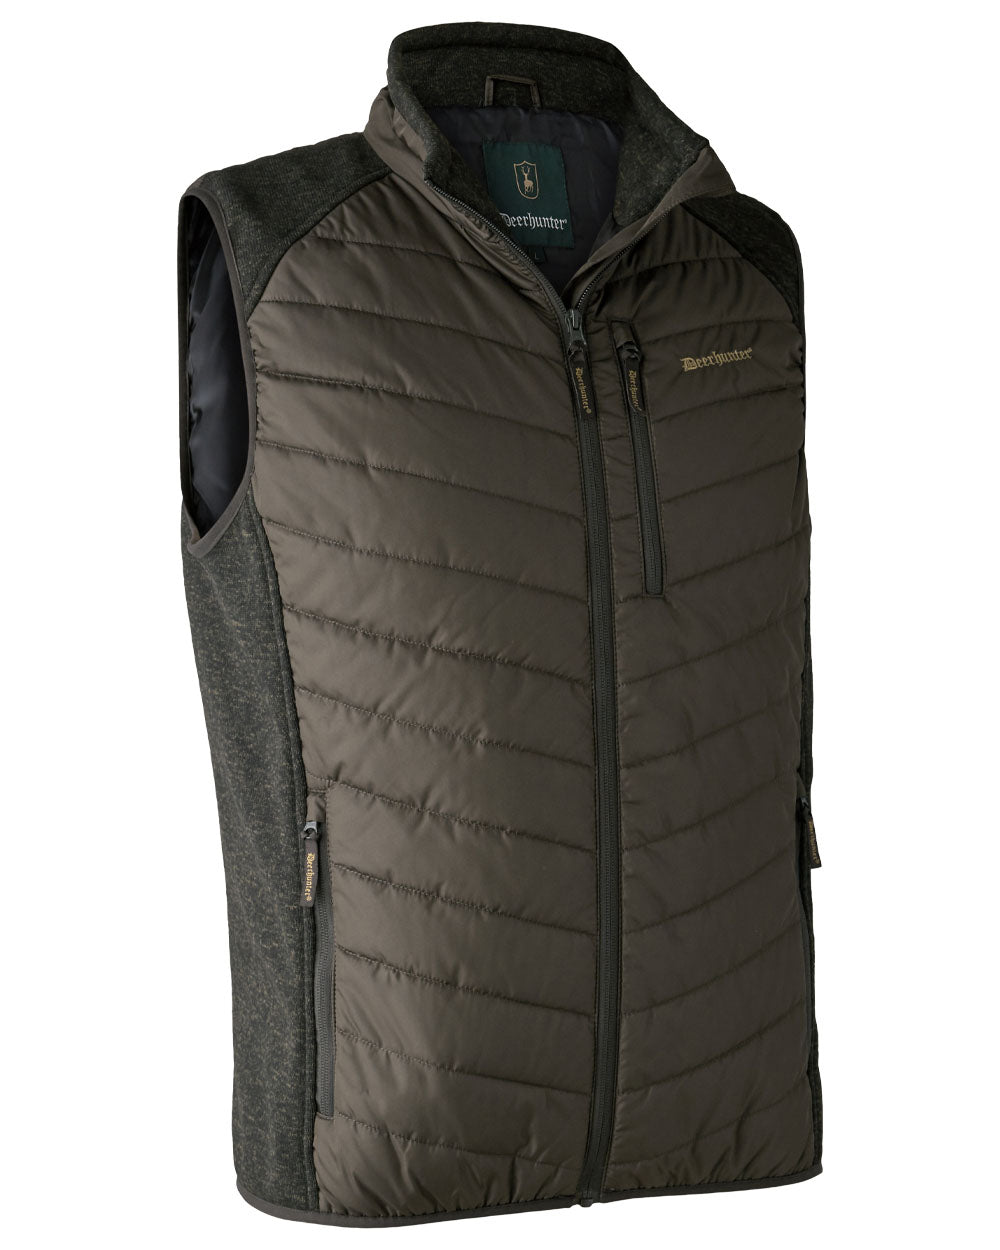 Timber coloured Deerhunter Moor Padded Waistcoat with Knit on White background 